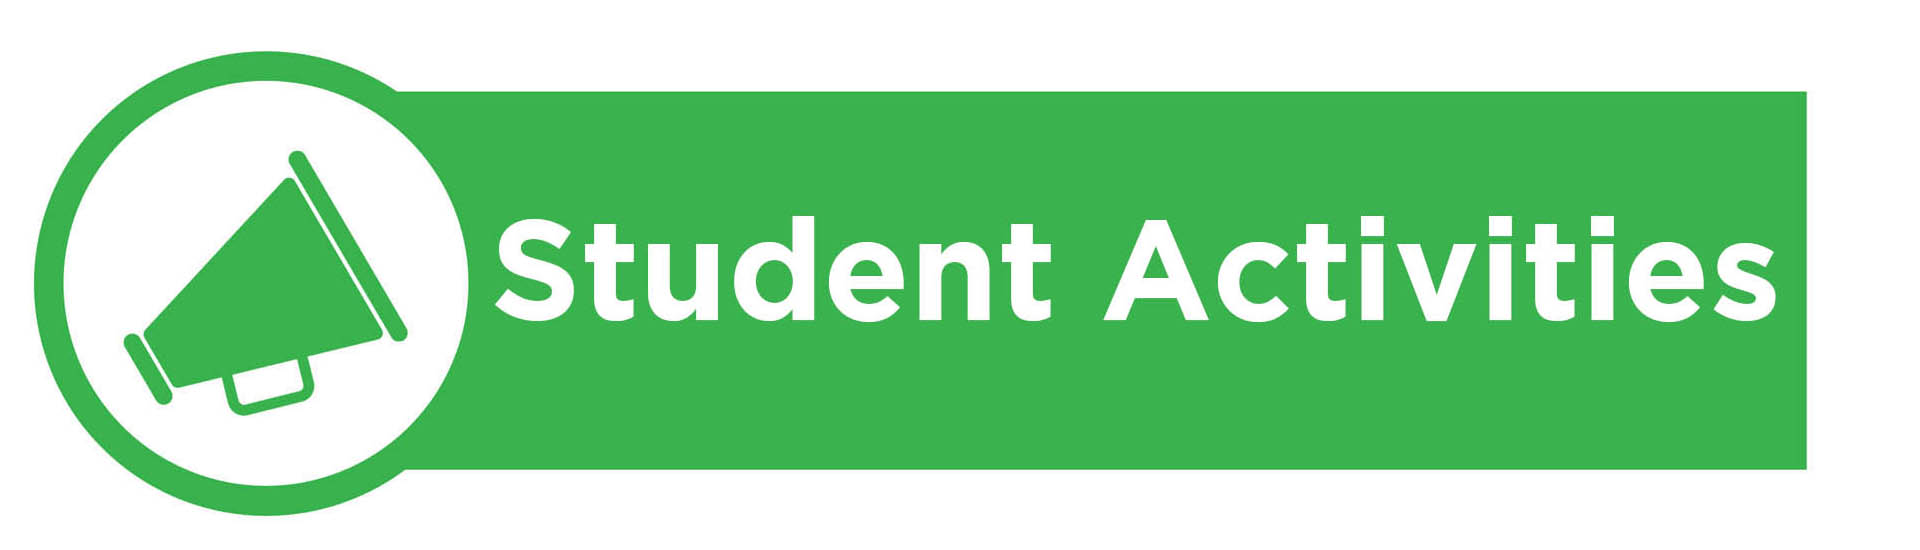 Banner image containing the text 'Student Activities'